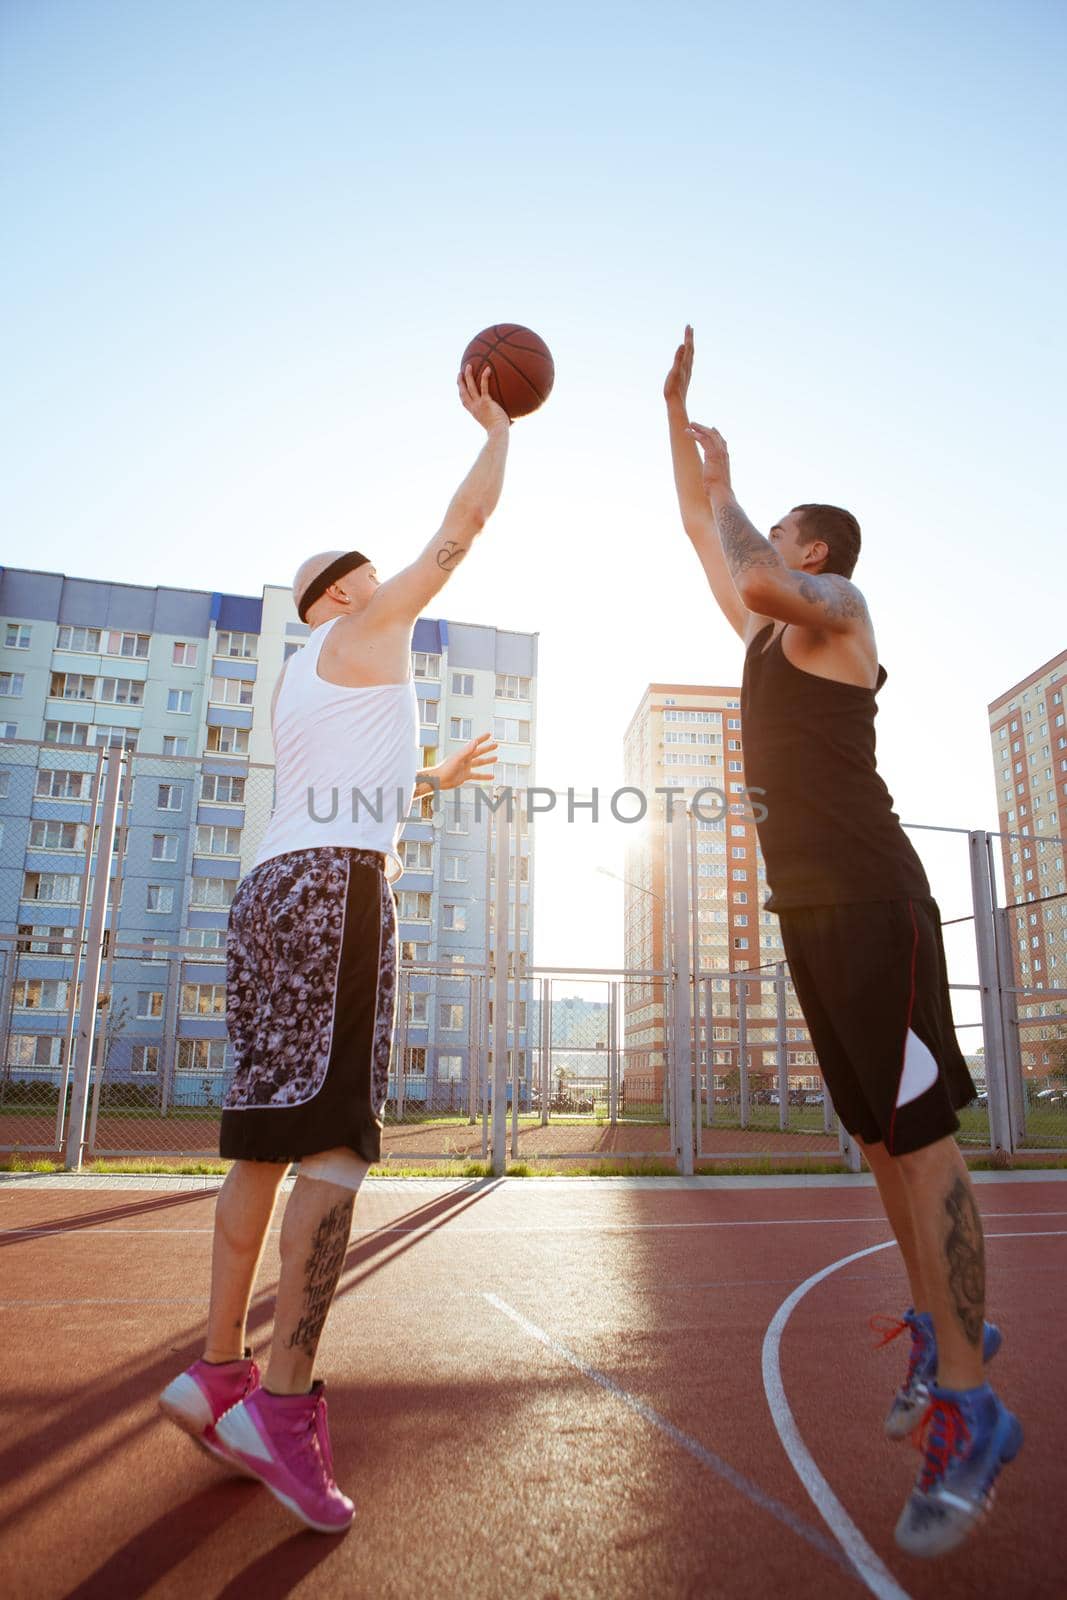 Two guys jump stretch to the ball on the basketball court by studiodav